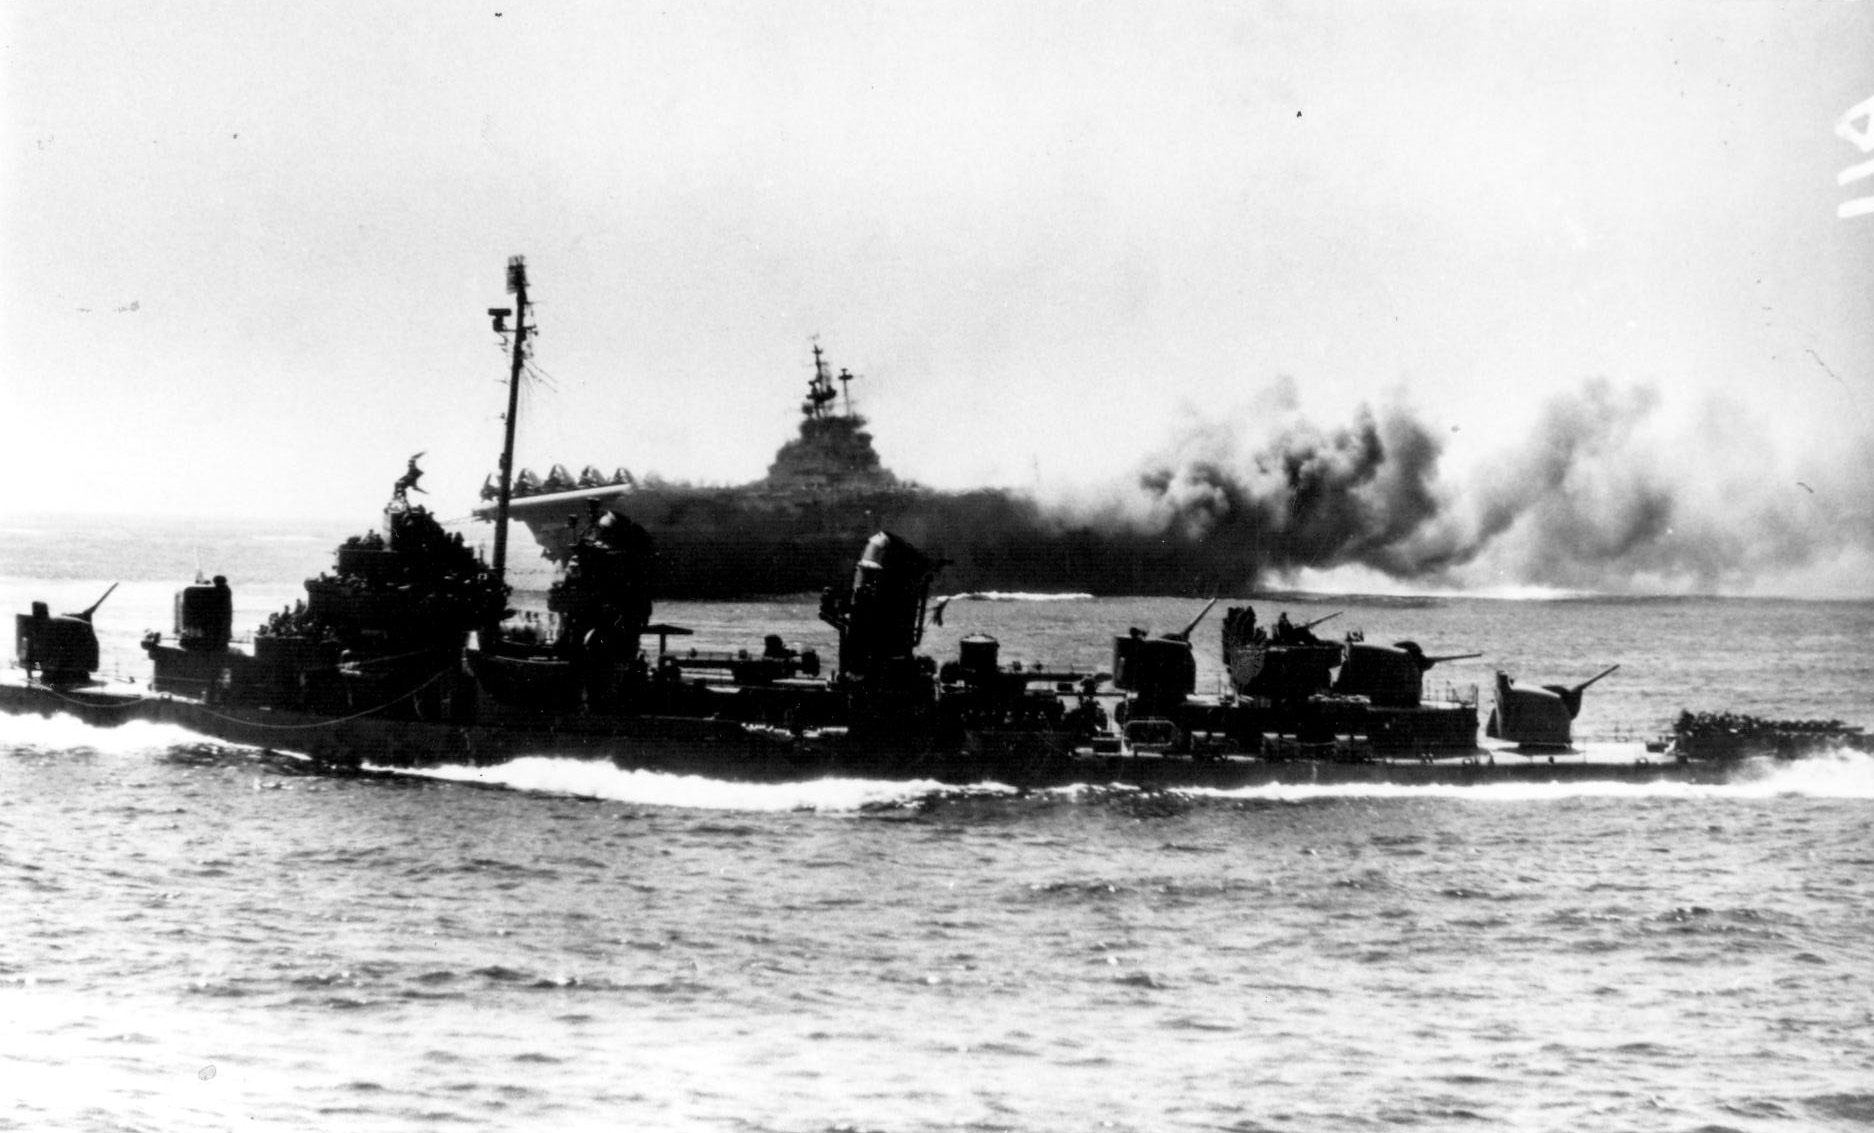 Intrepid burning after special attack, off Okinawa, Japan, 16 Apr 1945; a Fletcher-class destroyer in foreground